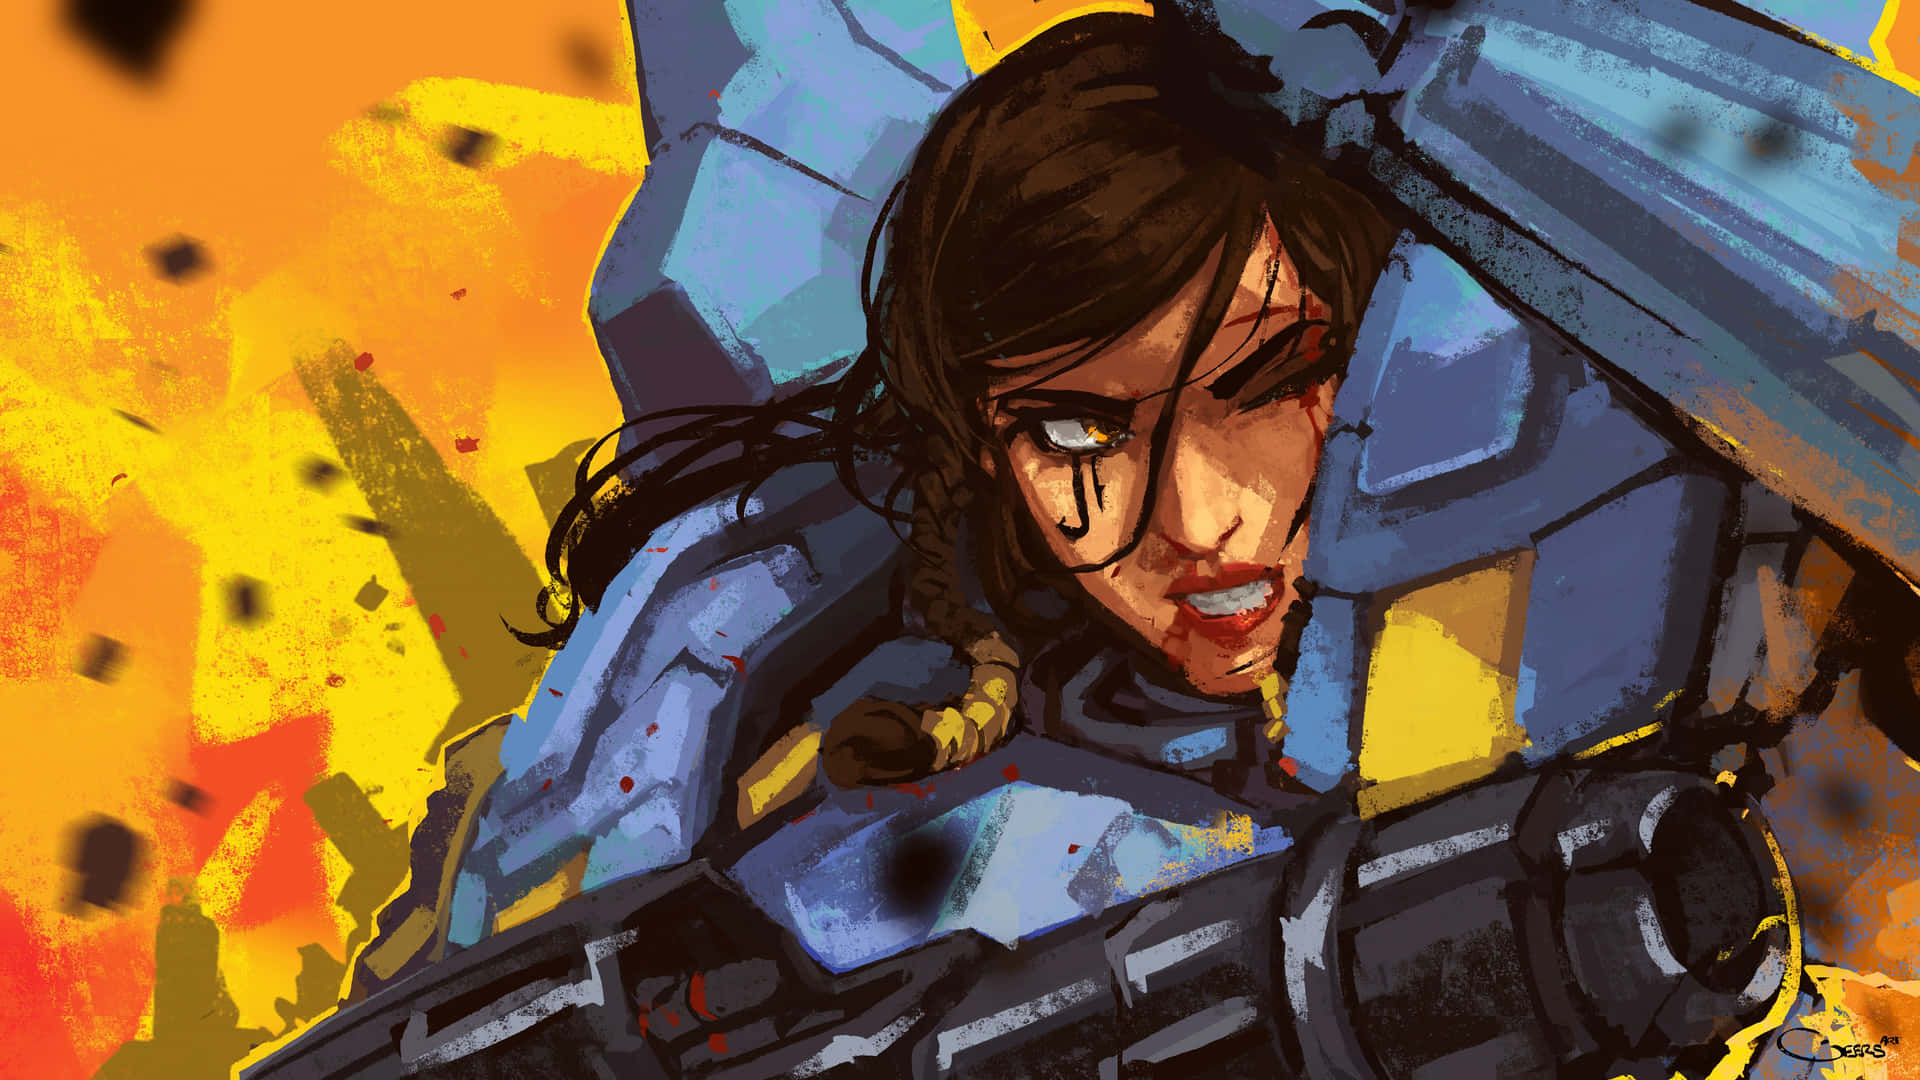 Soaring High - Pharah from Overwatch Wallpaper